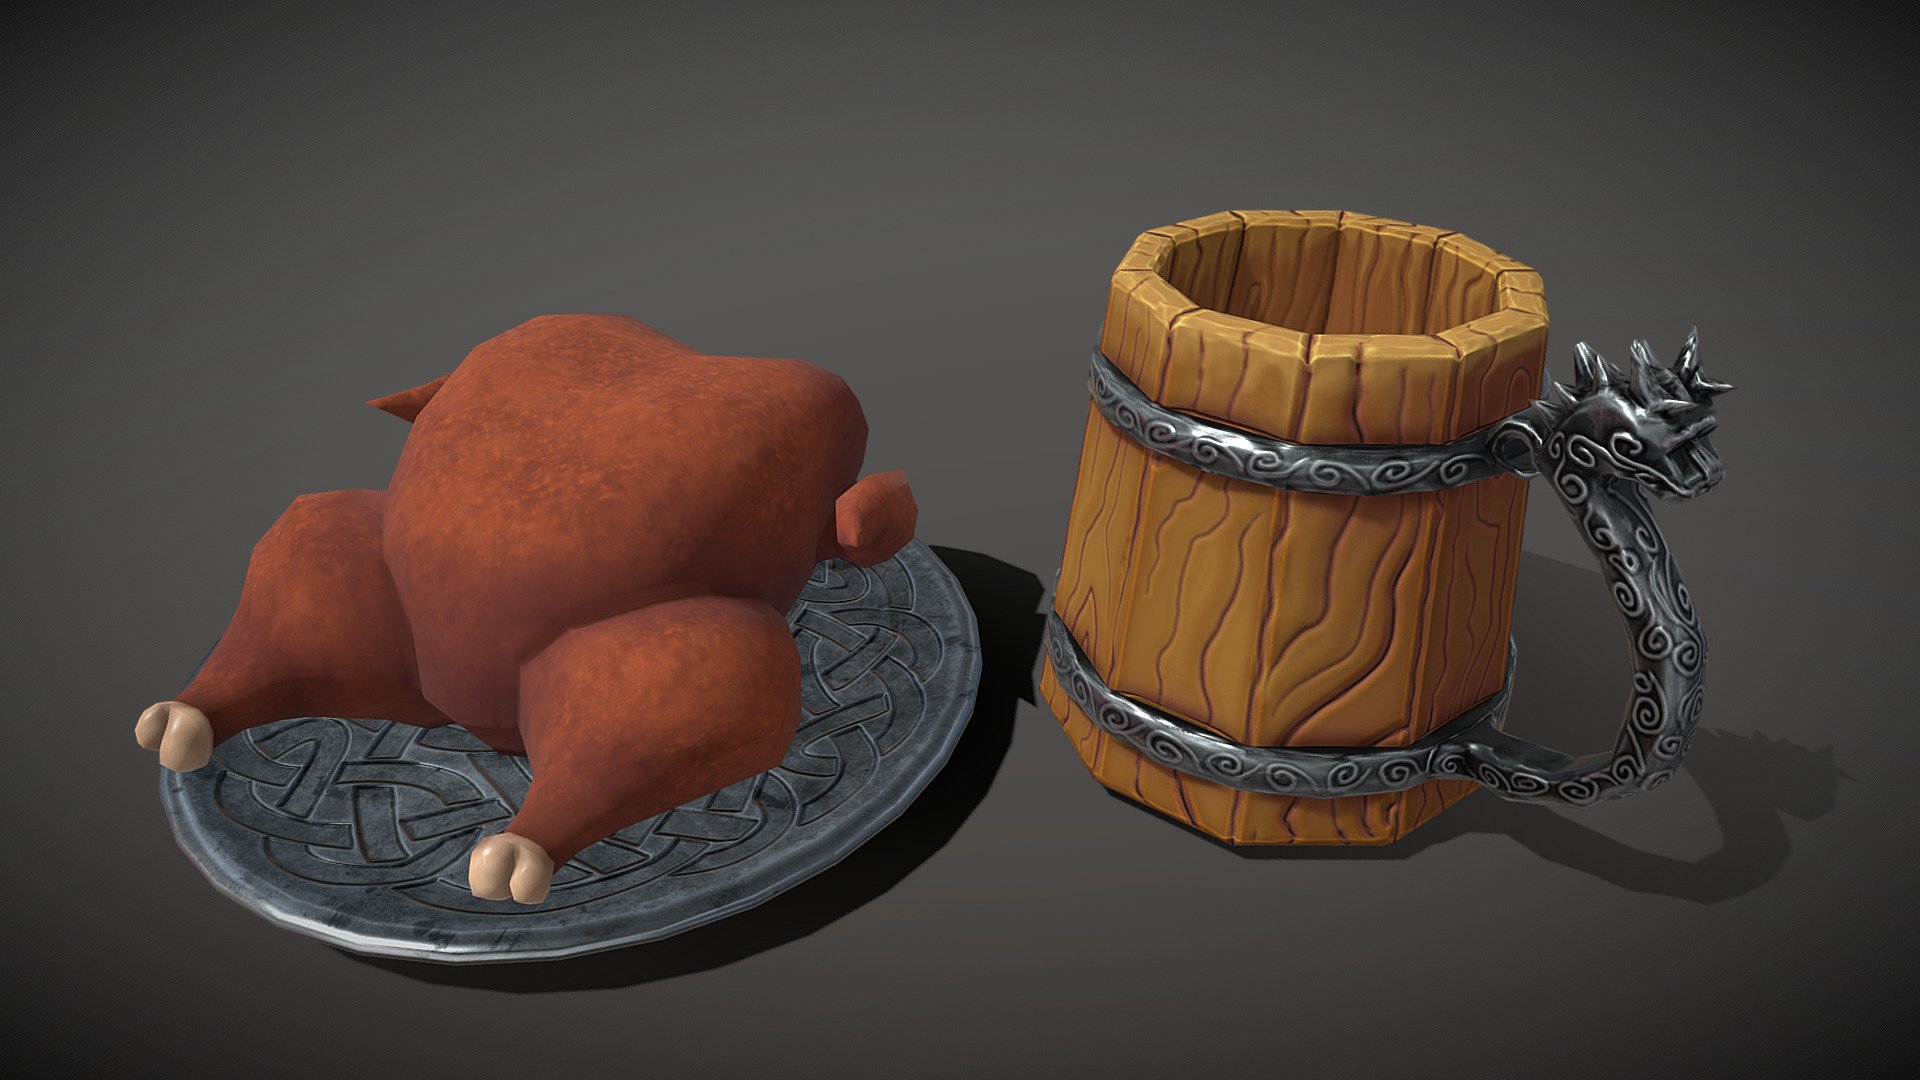 Attention to every viking! 

Stylized fantasy low poly game asset in cartoon handpainted style. Hand painted game ready low poly beer mug and roasted chicken dish prop.



Textures:
Beer mug: Color, Metalness, Roughness, Normal map

Chicken: Color and Roughness 

Plate: Color and Normal Map

All textures are 2K PNG files.



Ideal for fantasy tavern, kitchen, pub, viking feast and table setting environment. Please check other stylized props in my collection and feel free to connect with me if you have any questions 3d model